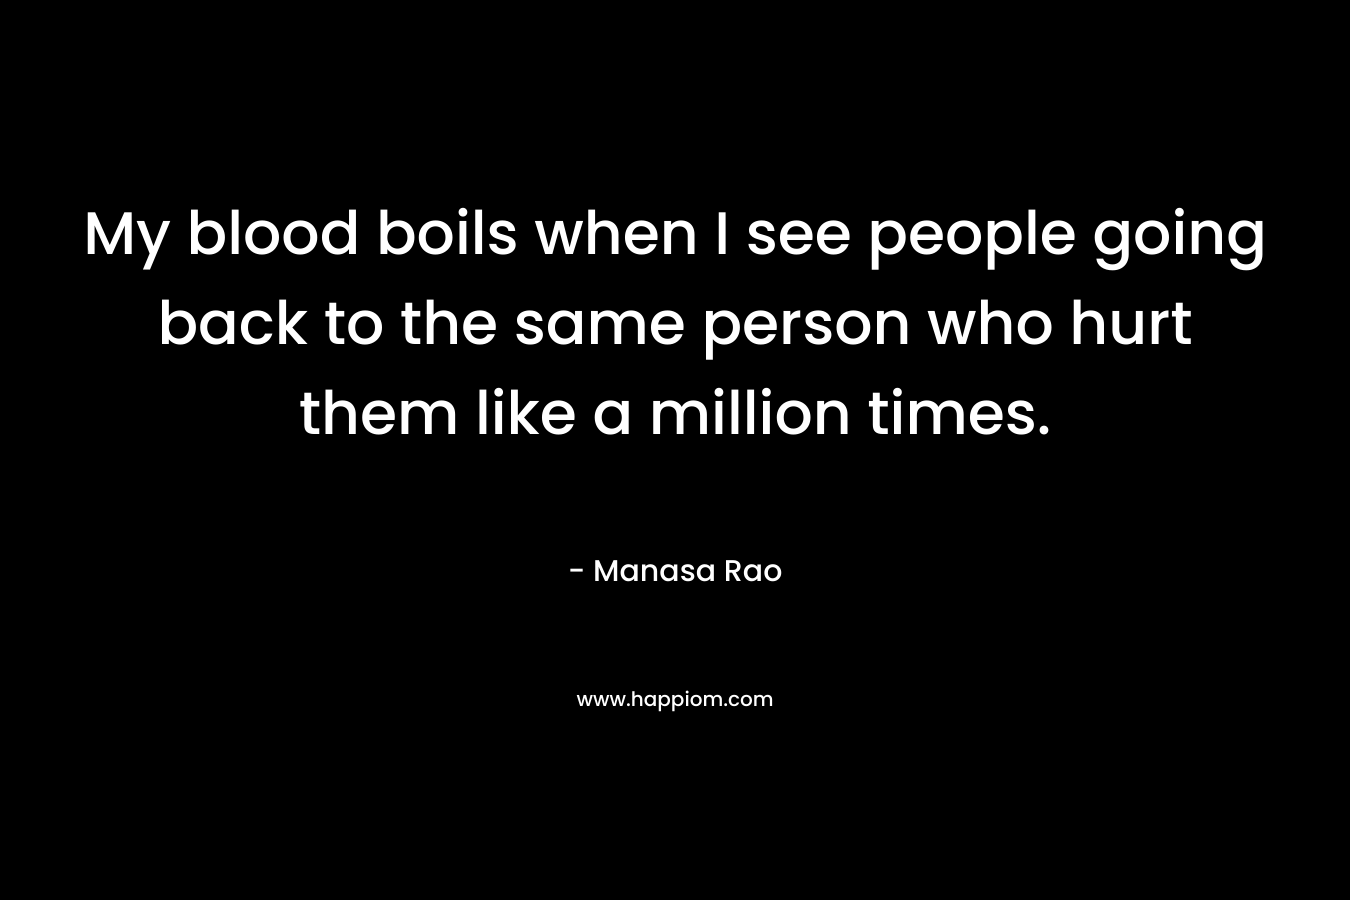 My blood boils when I see people going back to the same person who hurt them like a million times. – Manasa Rao